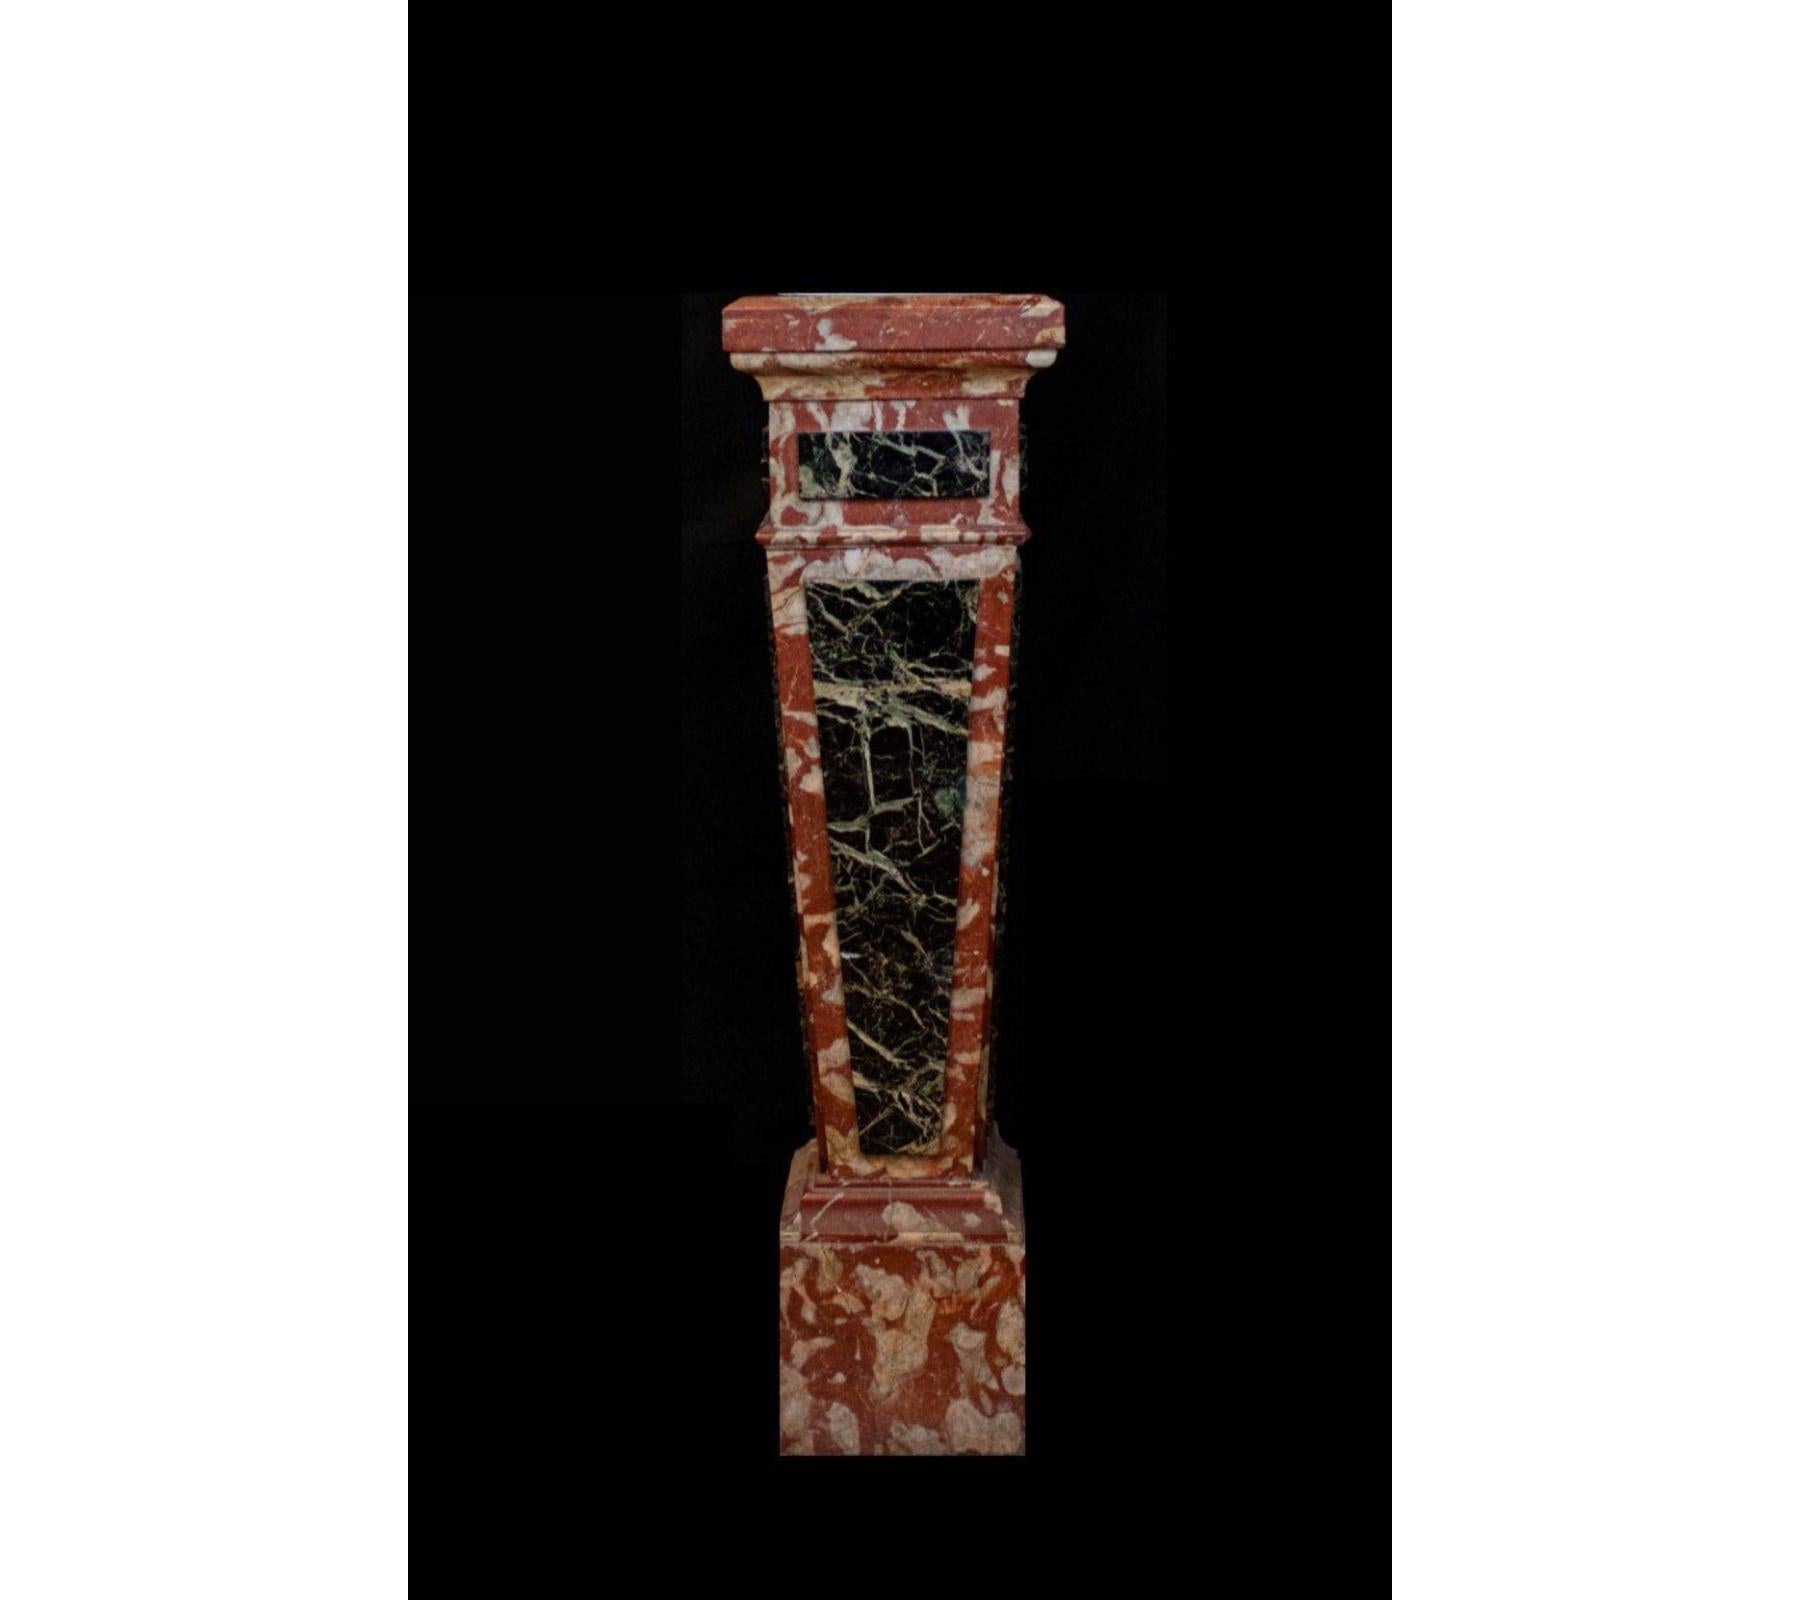 Unknown Figurative Sculpture - Sheath In Sea Green And Red Marble From Caunes-minervois Nineteenth